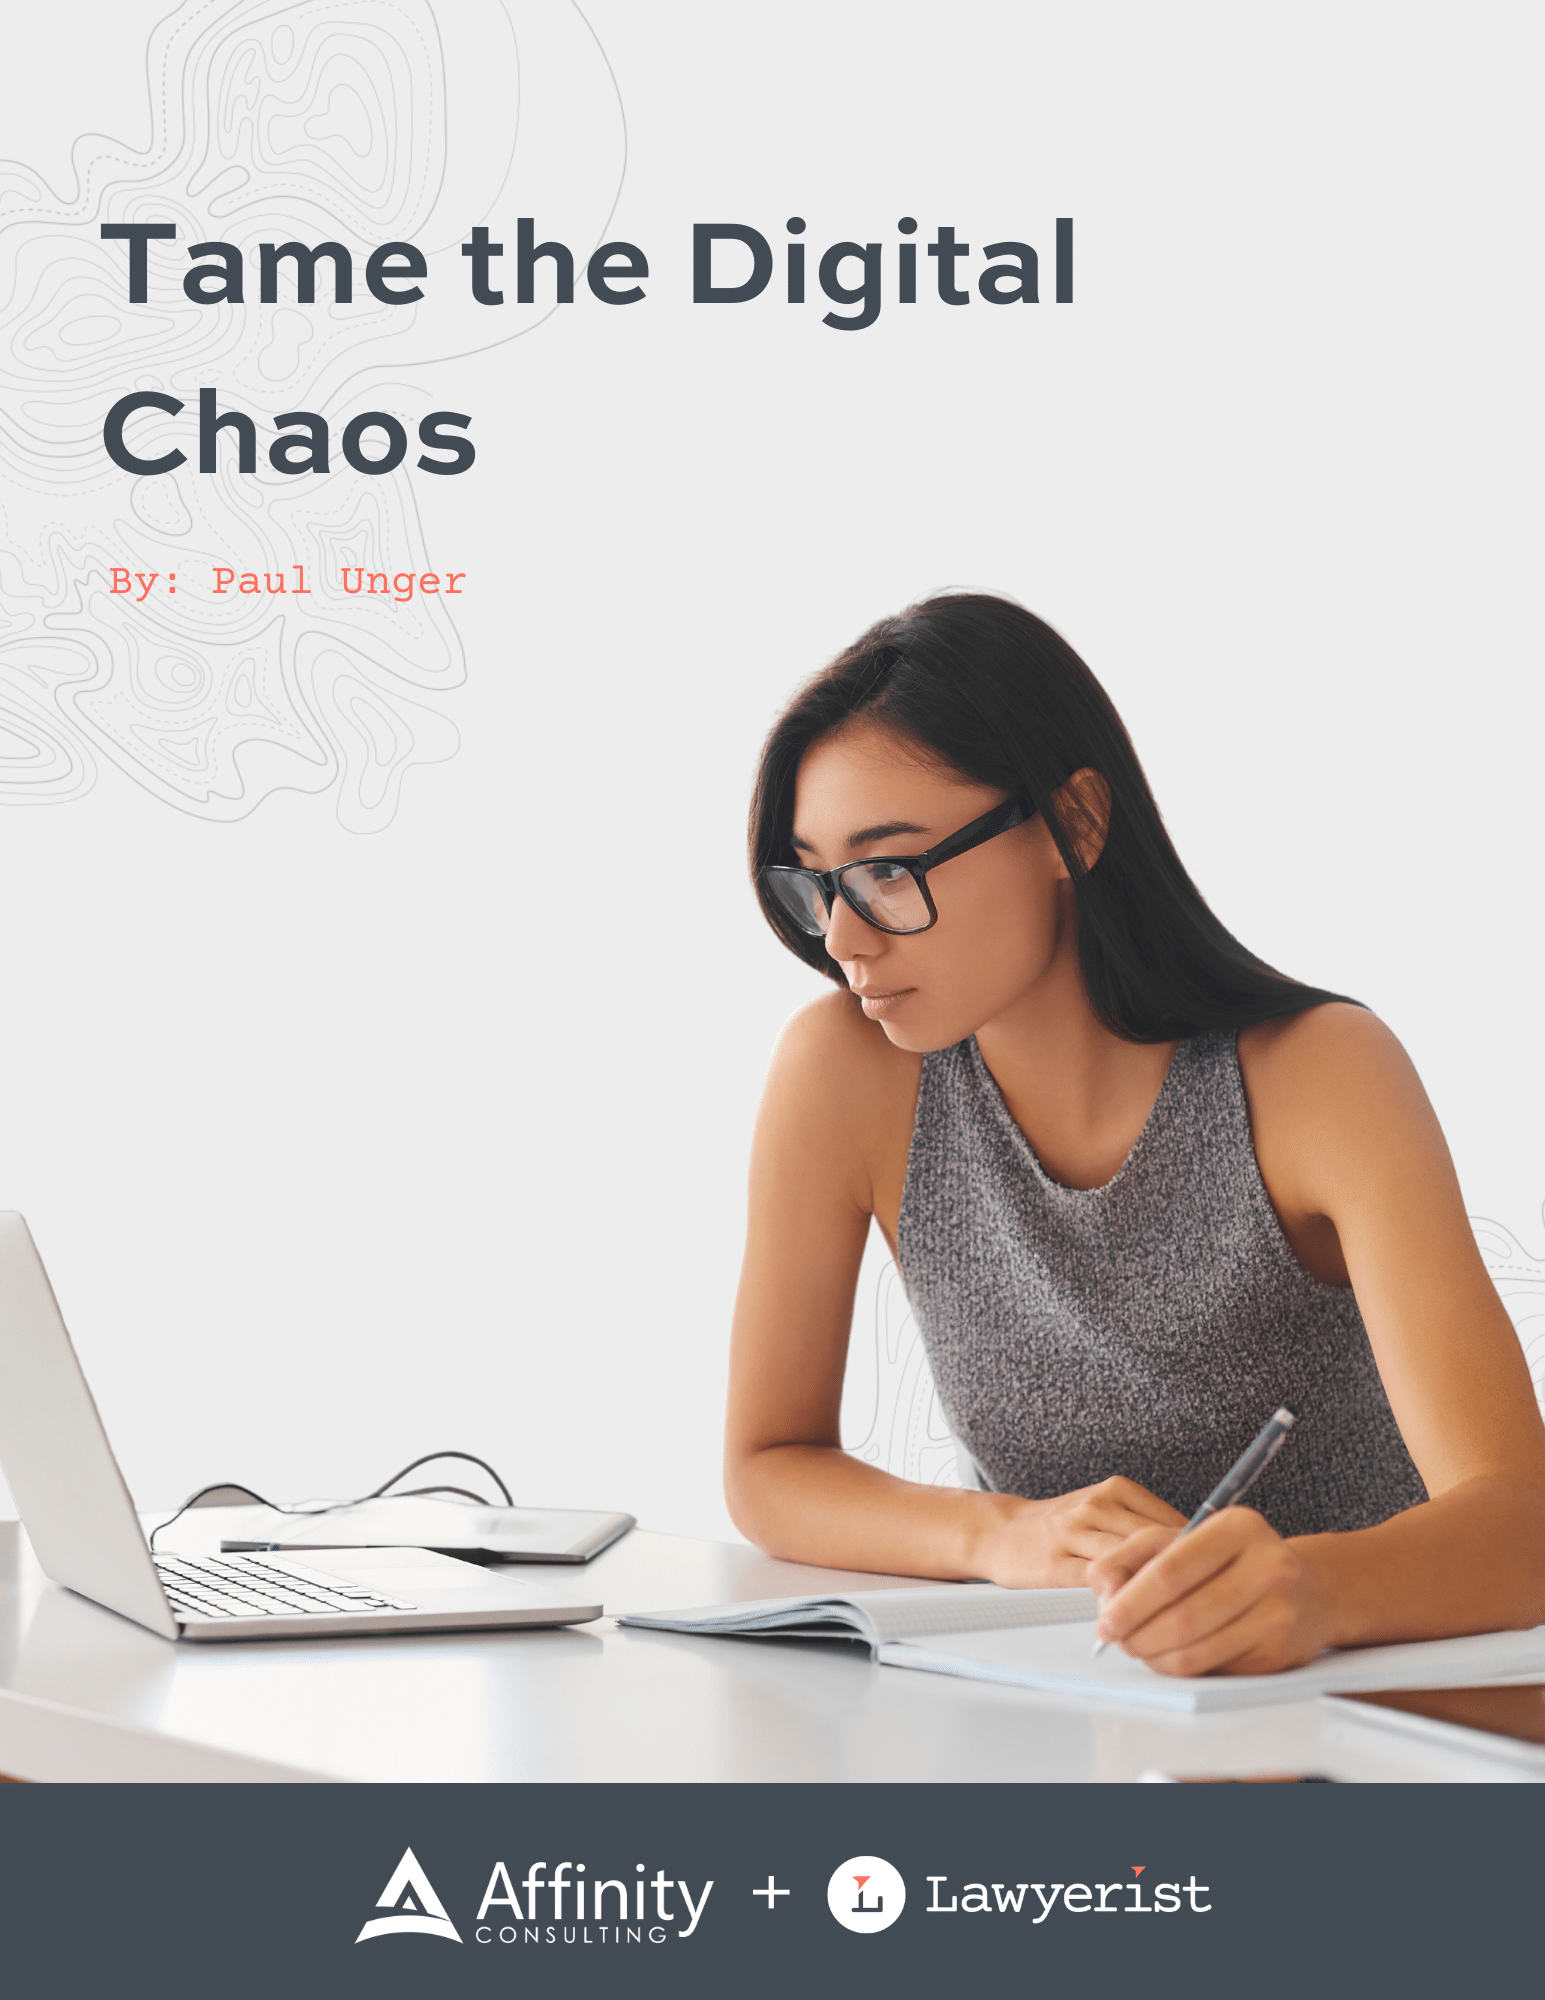 Book cover of Tame the Digital Chaos featuring a woman working at a laptop